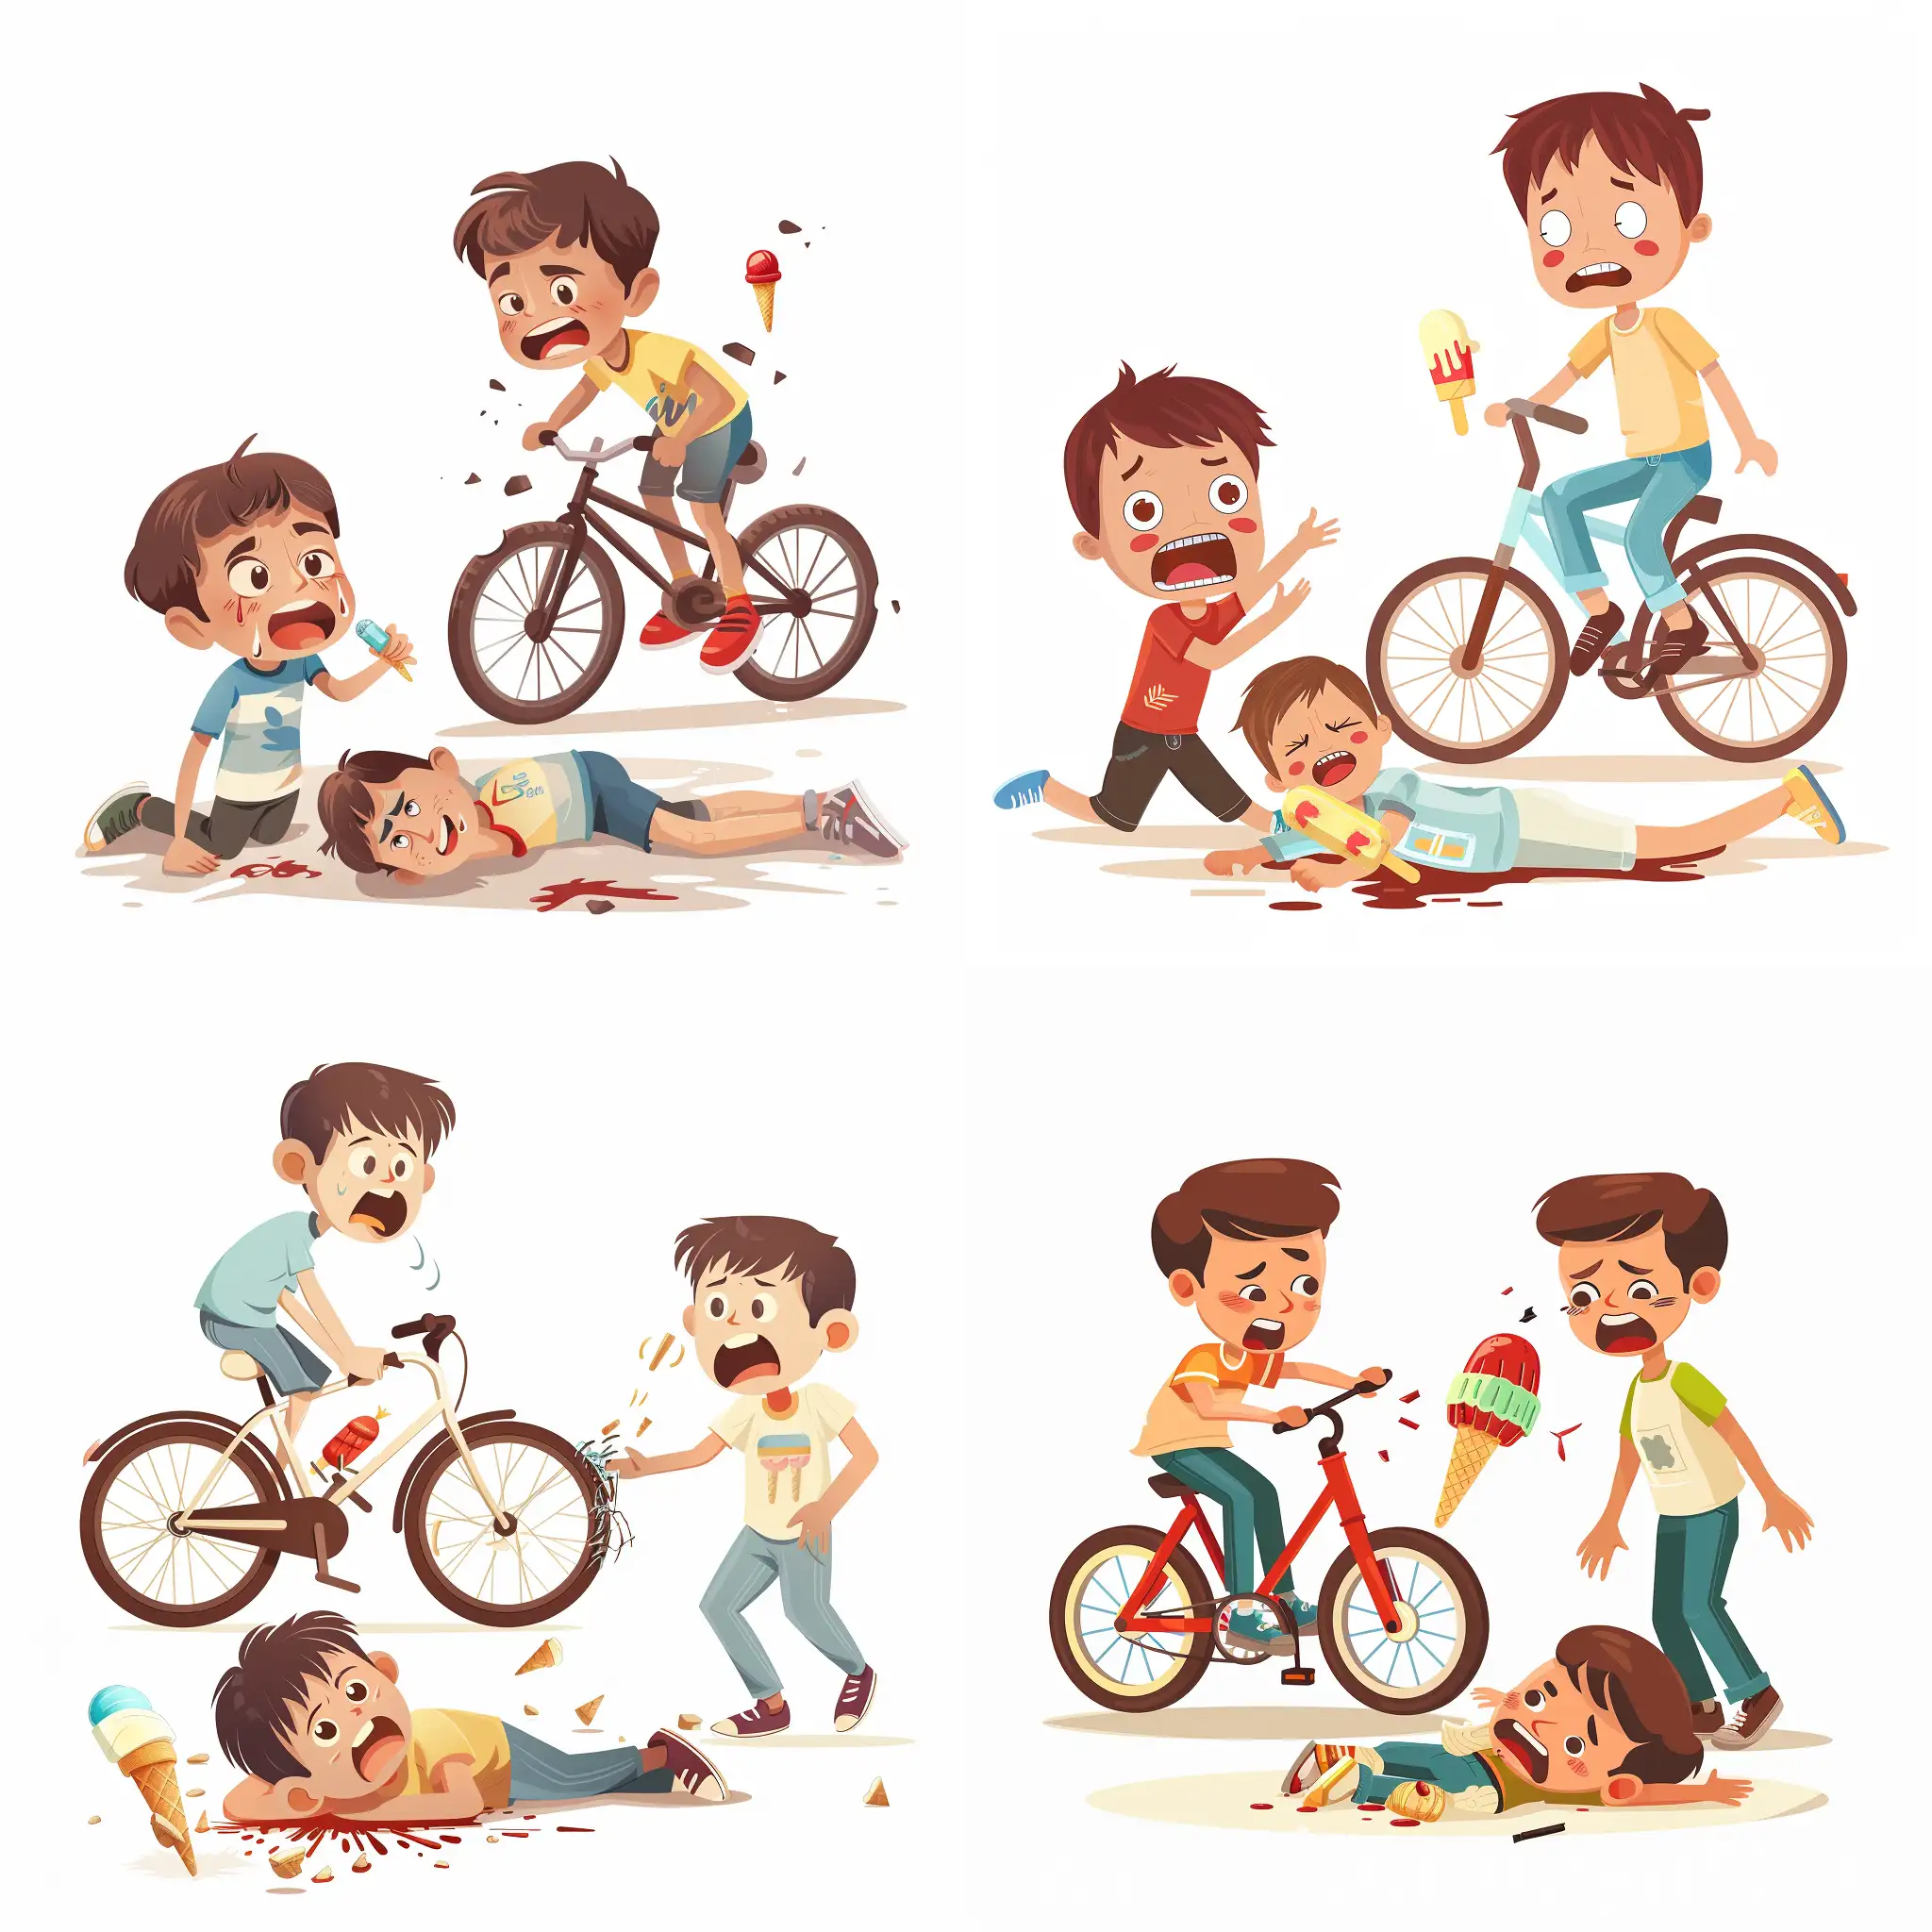 Bicycle-Accident-Collided-Boy-Crying-as-Ice-Cream-Falls